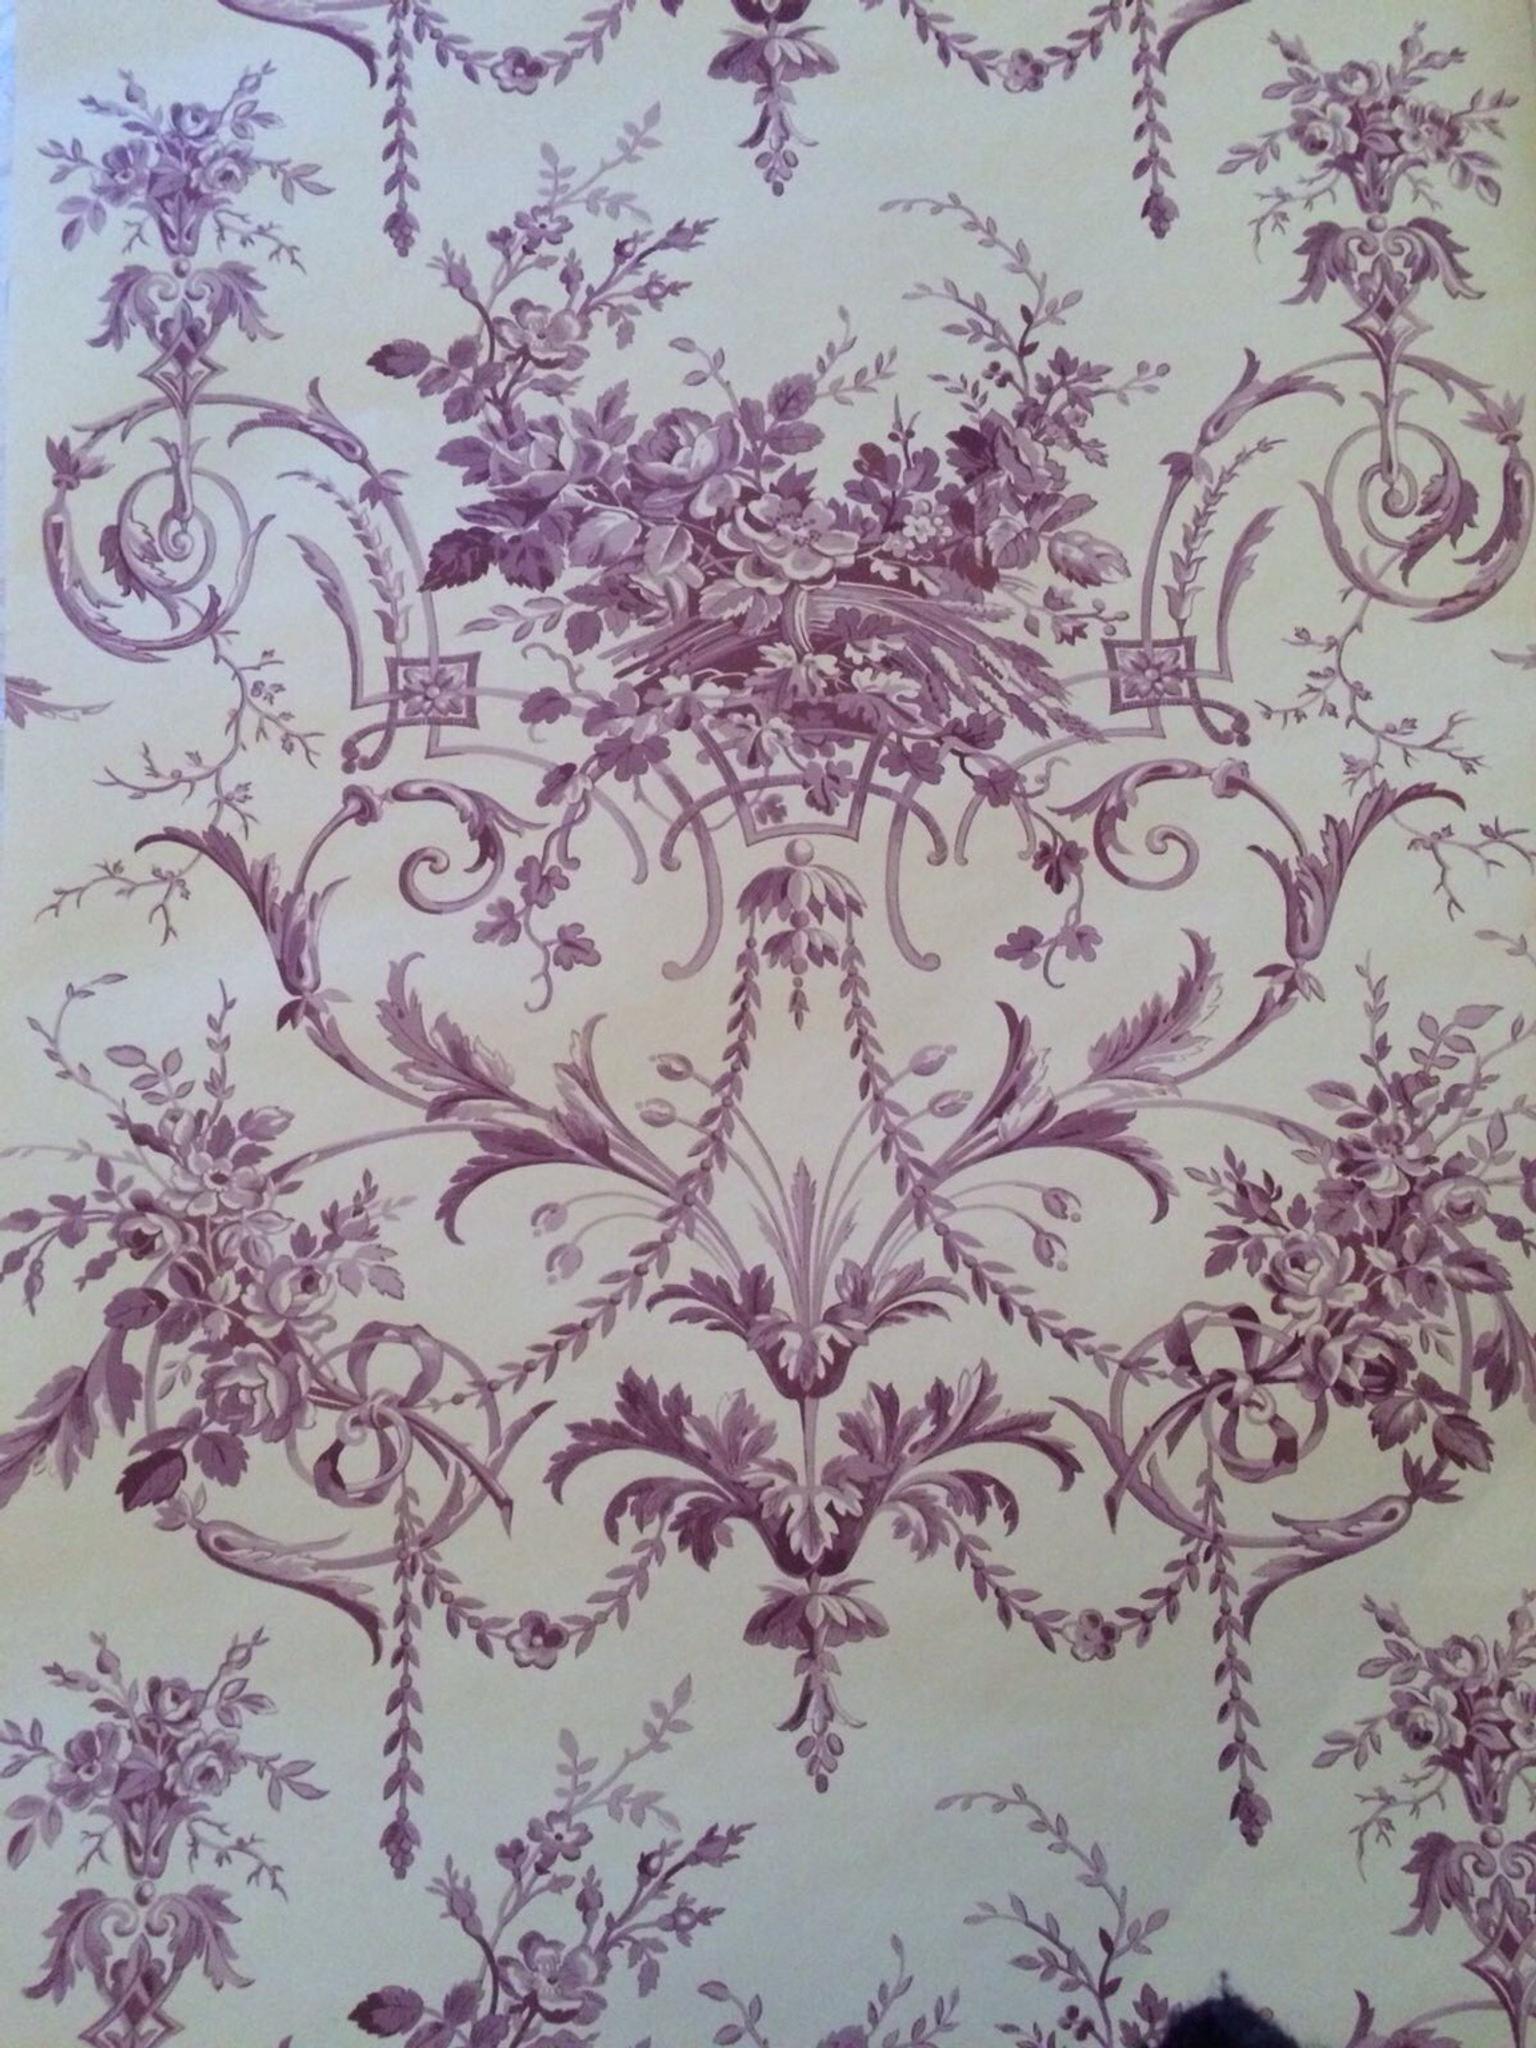 Laura Ashley Tuileries Wallpaper In St17 Stafford For 20 00 For Sale Shpock Shop laura ashley at urban outfitters. laura ashley tuileries wallpaper